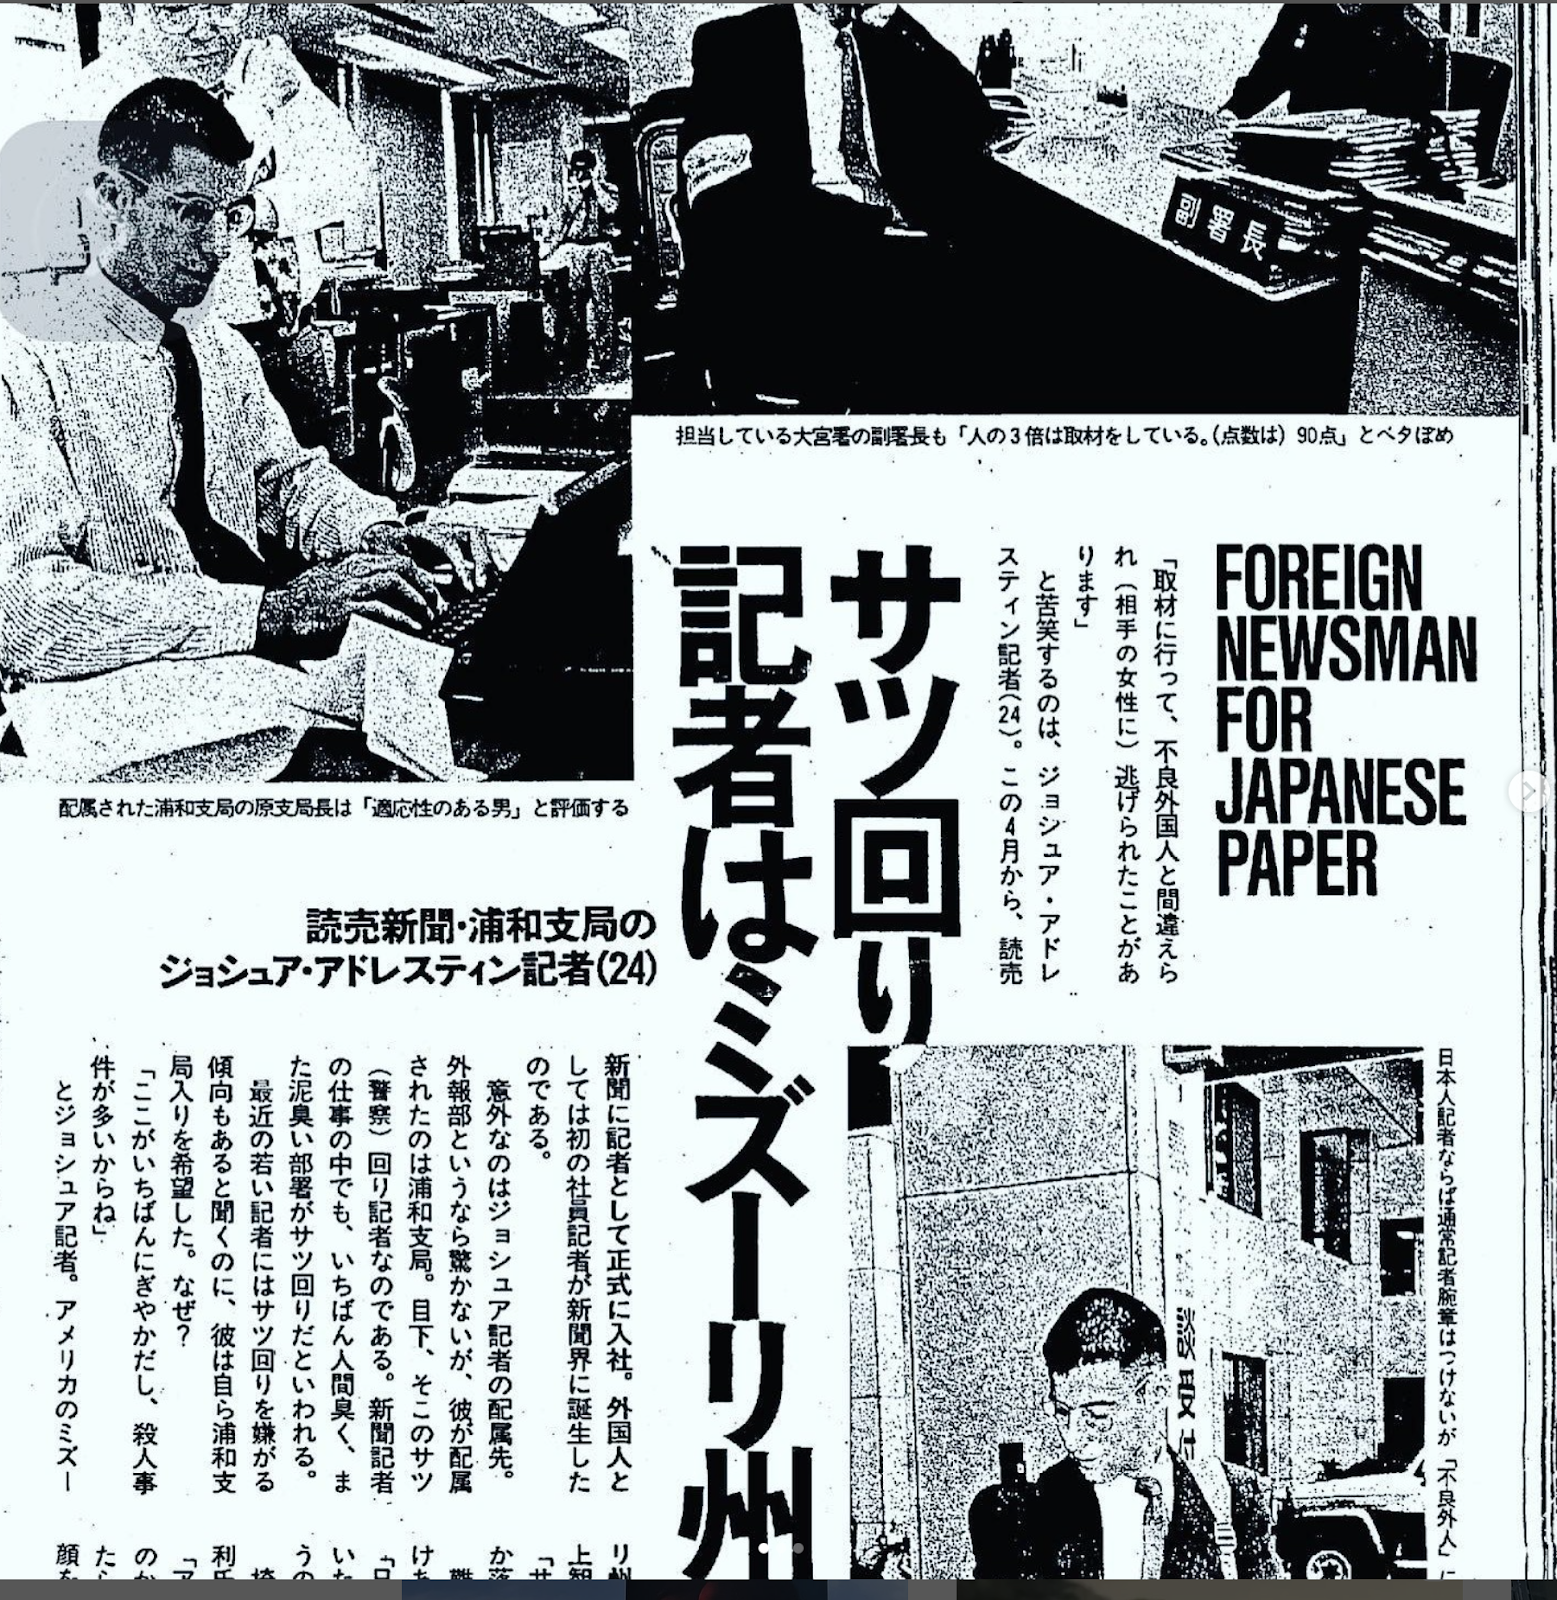 Jake Adelstein featured in a Japanese-language news article upon becoming the Yomiuri's first foreign reporter.